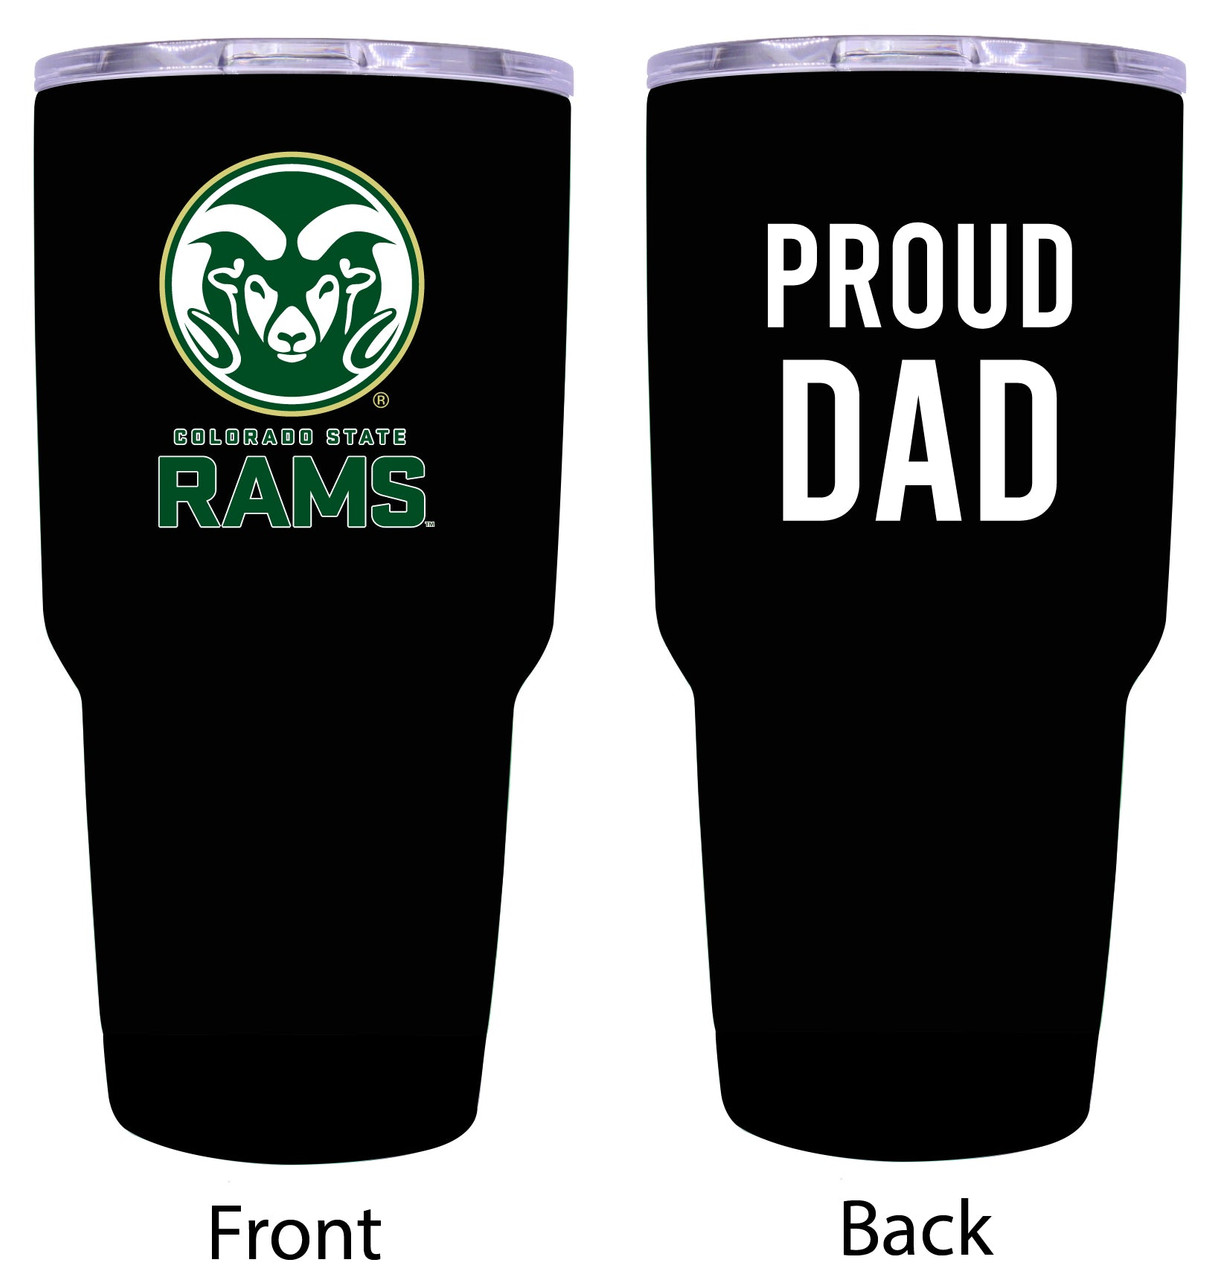 Colorado State Rams Proud Dad 24 oz Insulated Stainless Steel Tumblers Black.